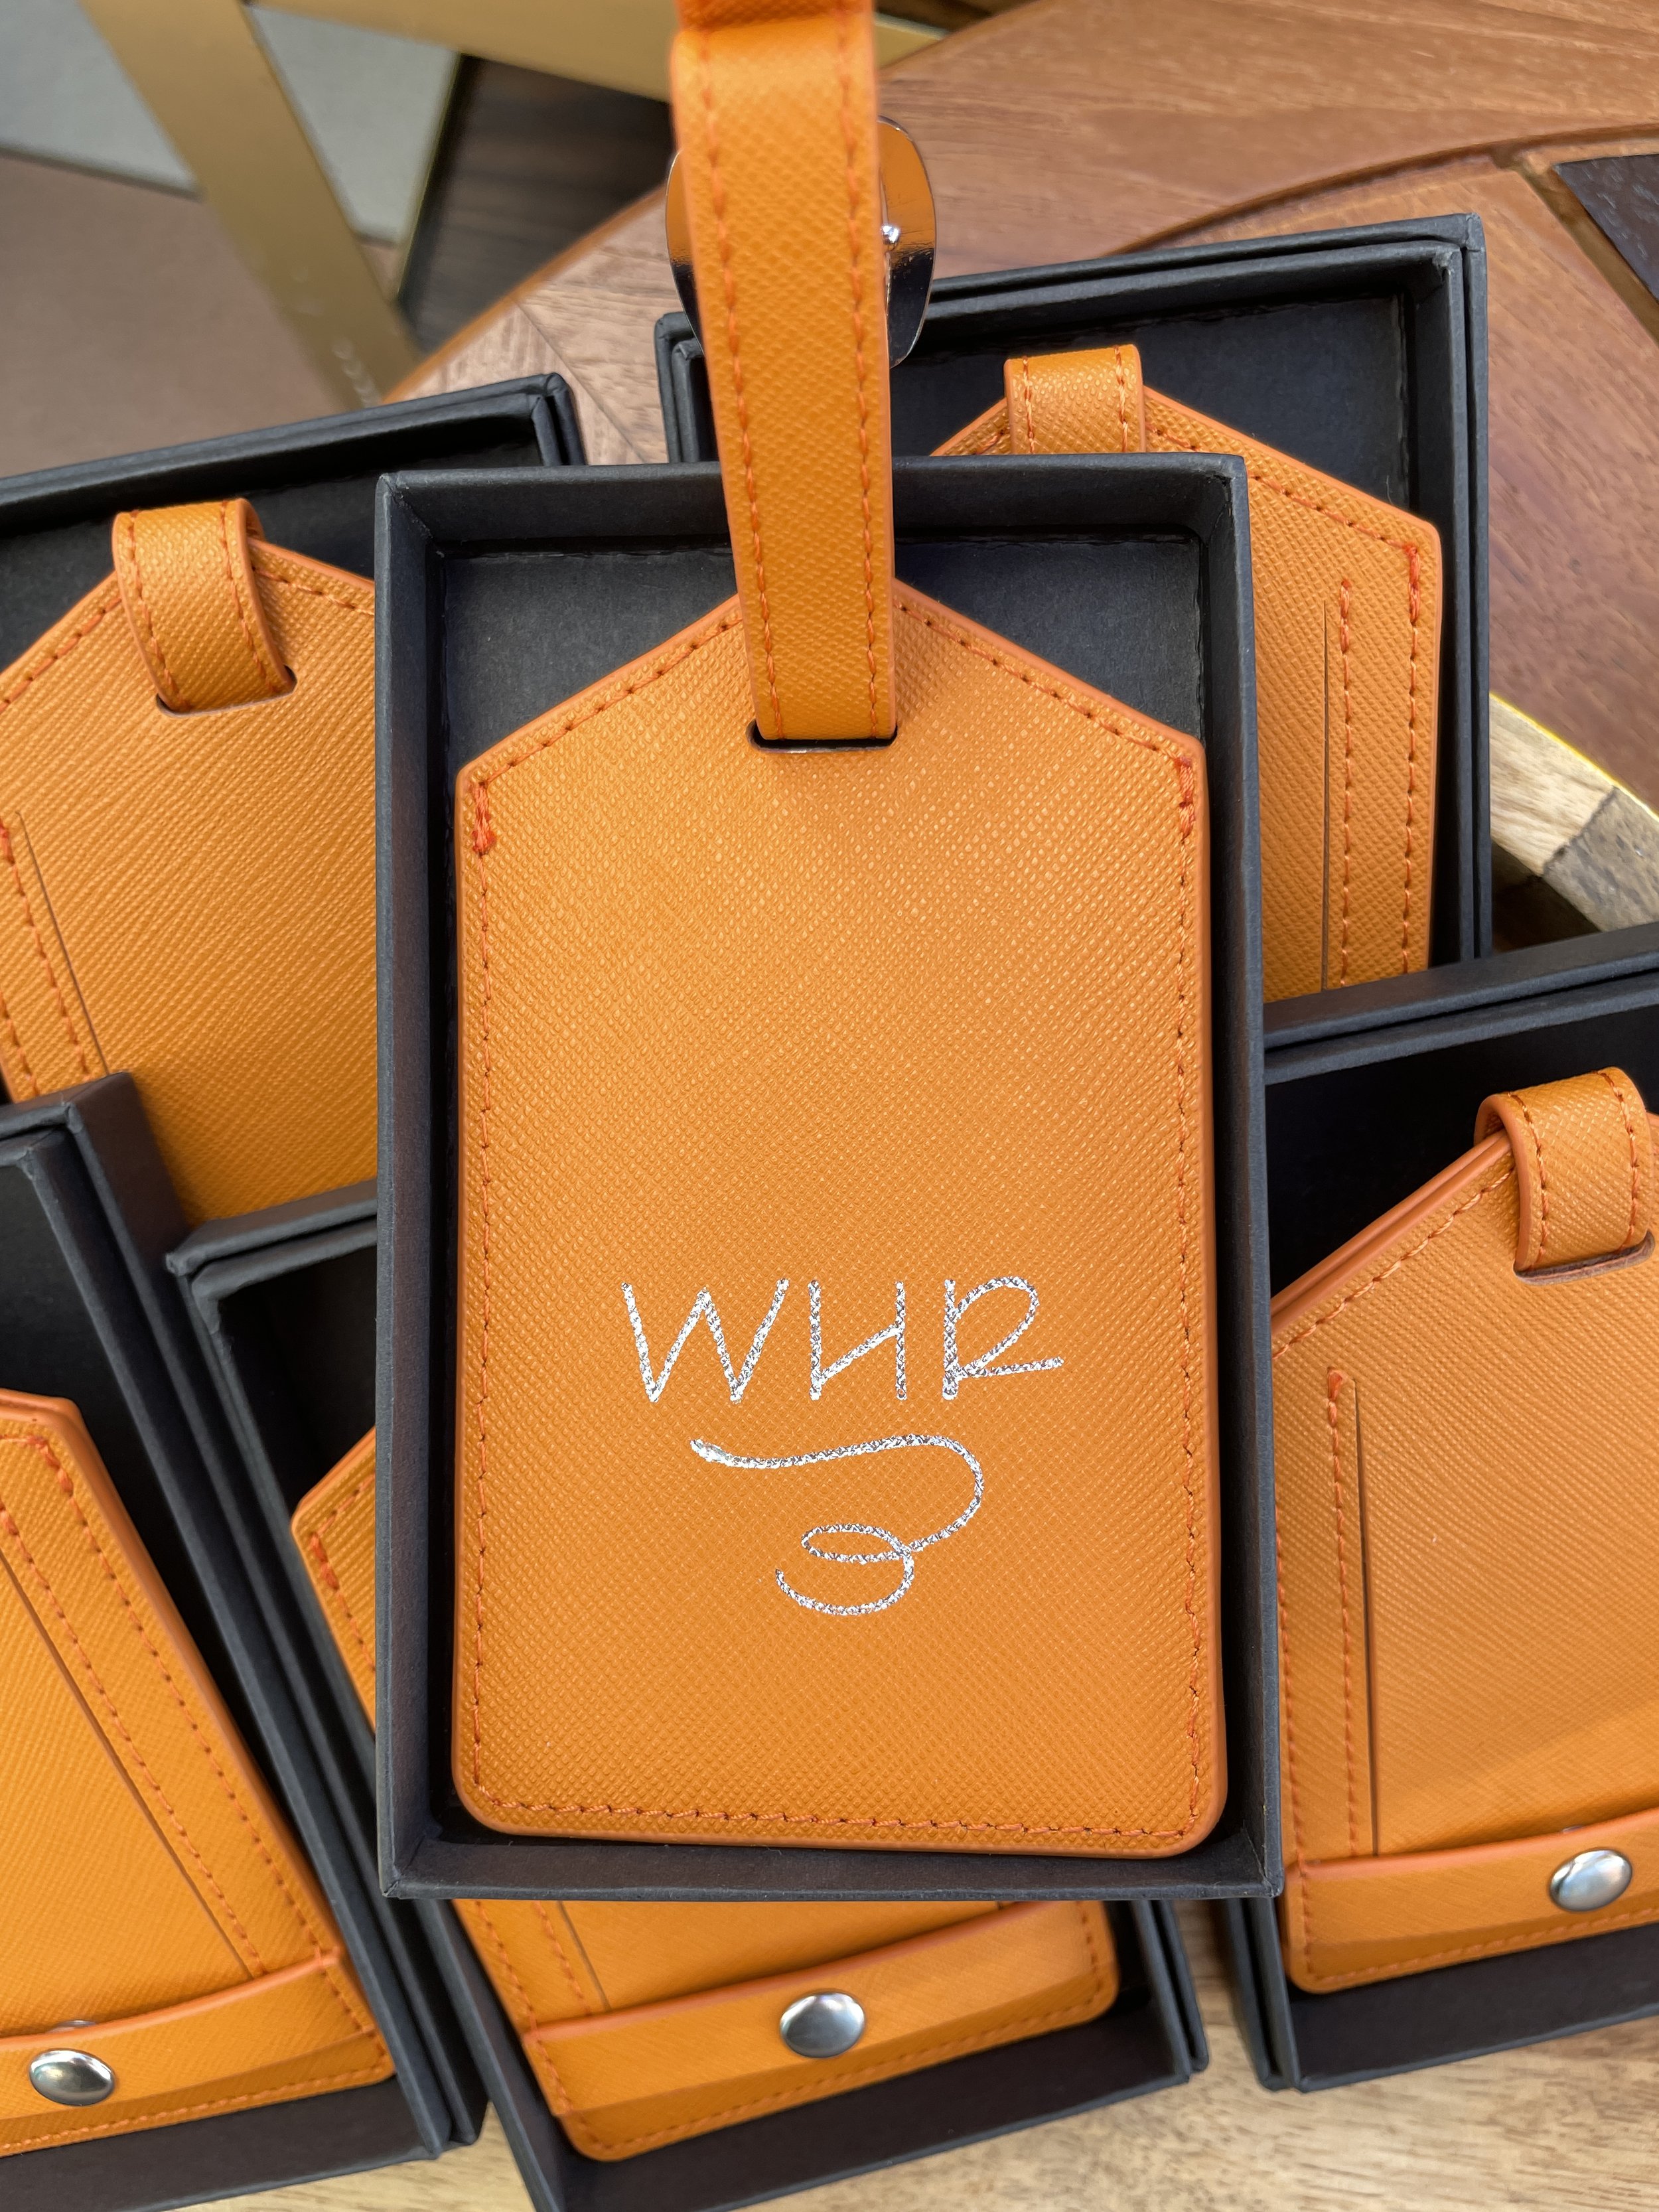 Luggage Tag Event with Trip Advisor (West Hollywood)